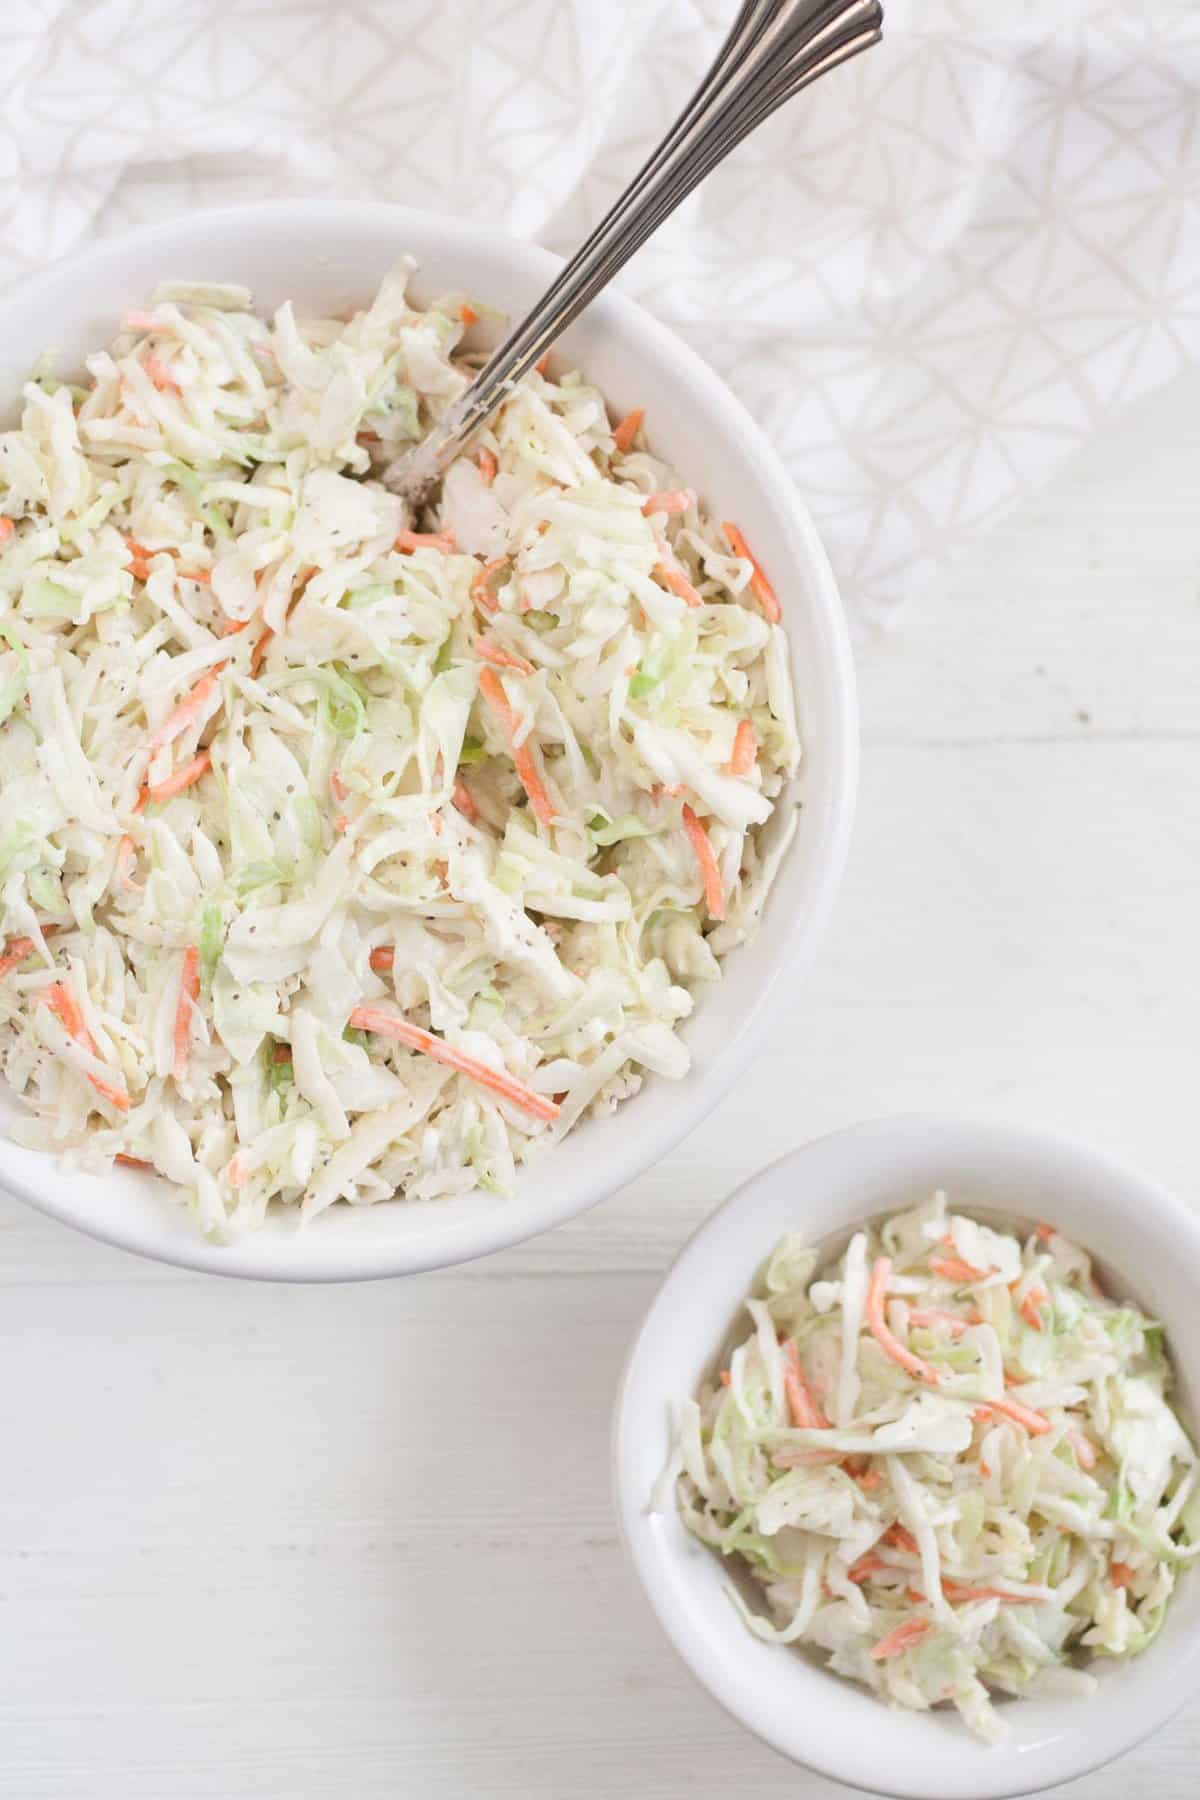  The perfect summer side dish, creamy cabbage salad.